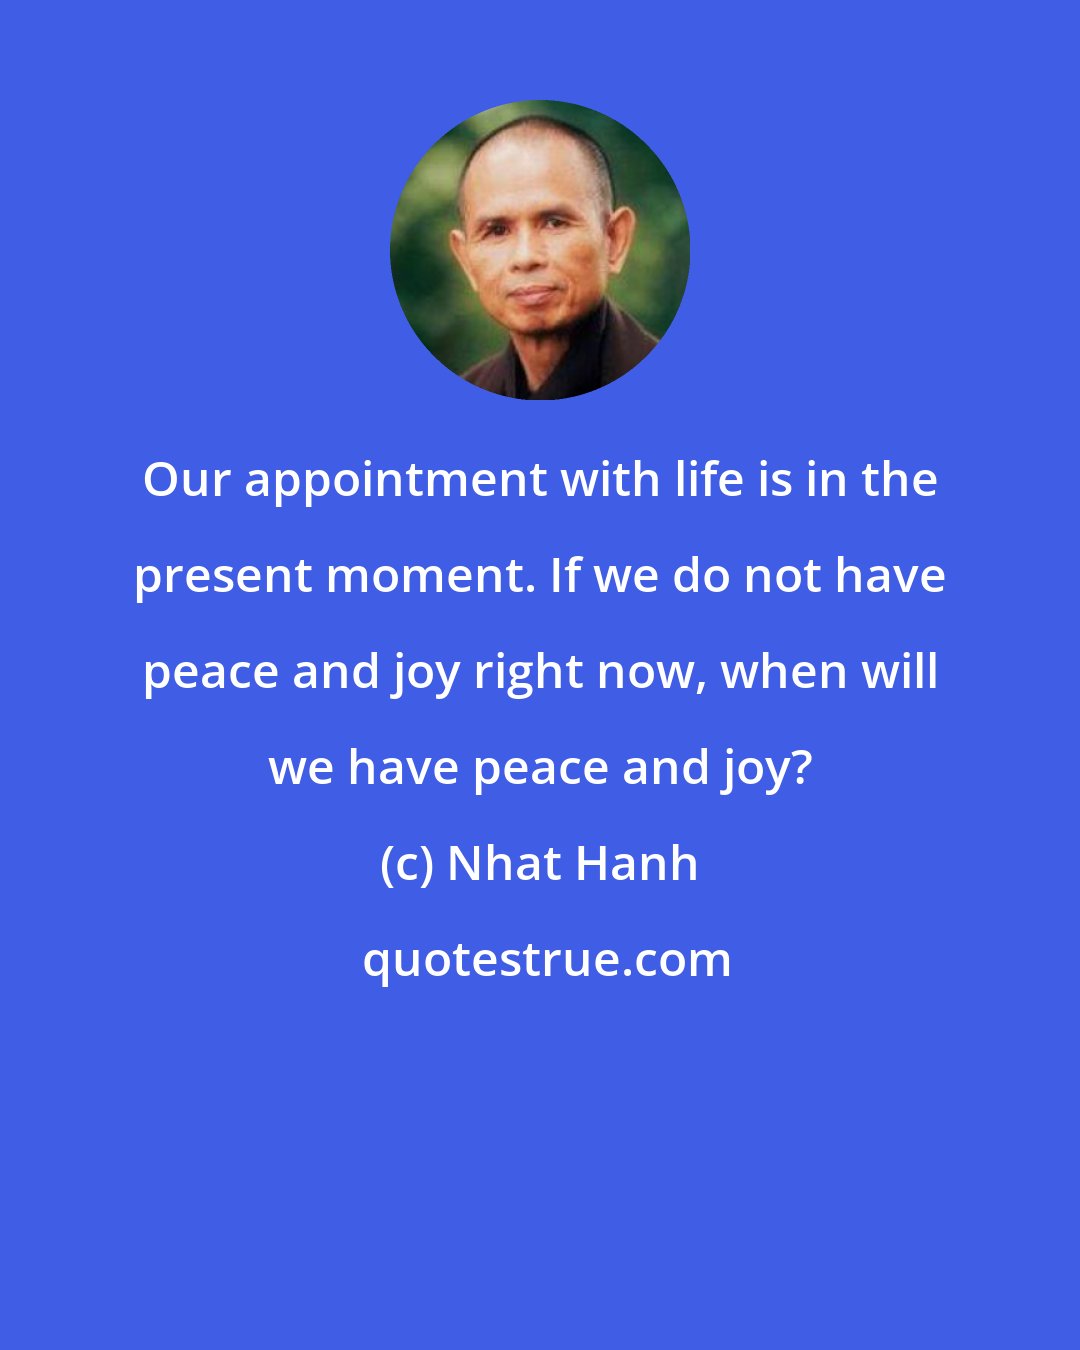 Nhat Hanh: Our appointment with life is in the present moment. If we do not have peace and joy right now, when will we have peace and joy?